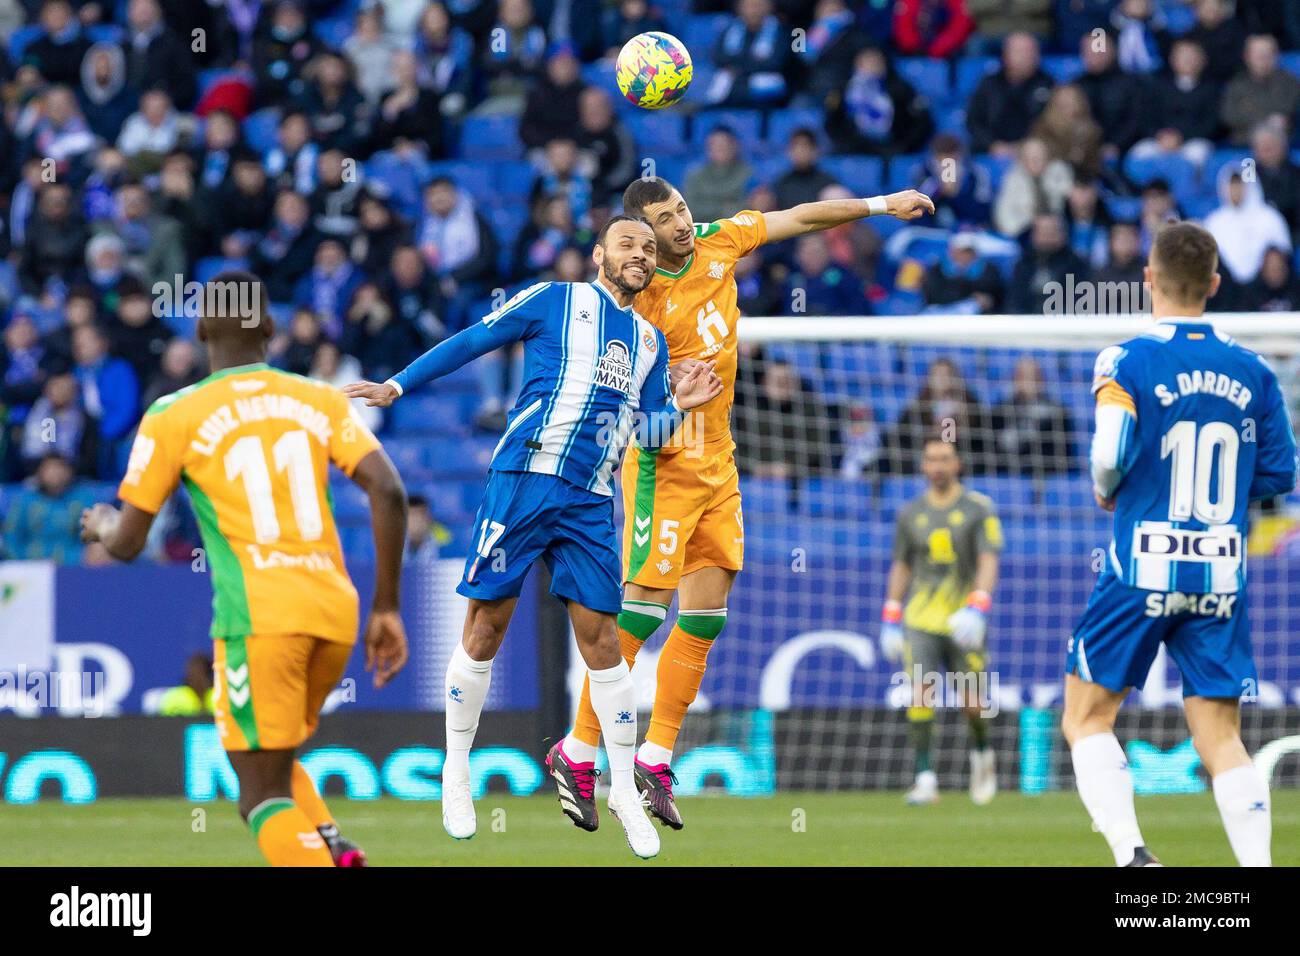 Martin Braithwaite of RCD Espanyol in action with Guido Rodriguez of Real Betis Balompie during the Liga match between RCD Espanyol and Real Betis at RCDE Stadium in Cornella, Spain. Stock Photo